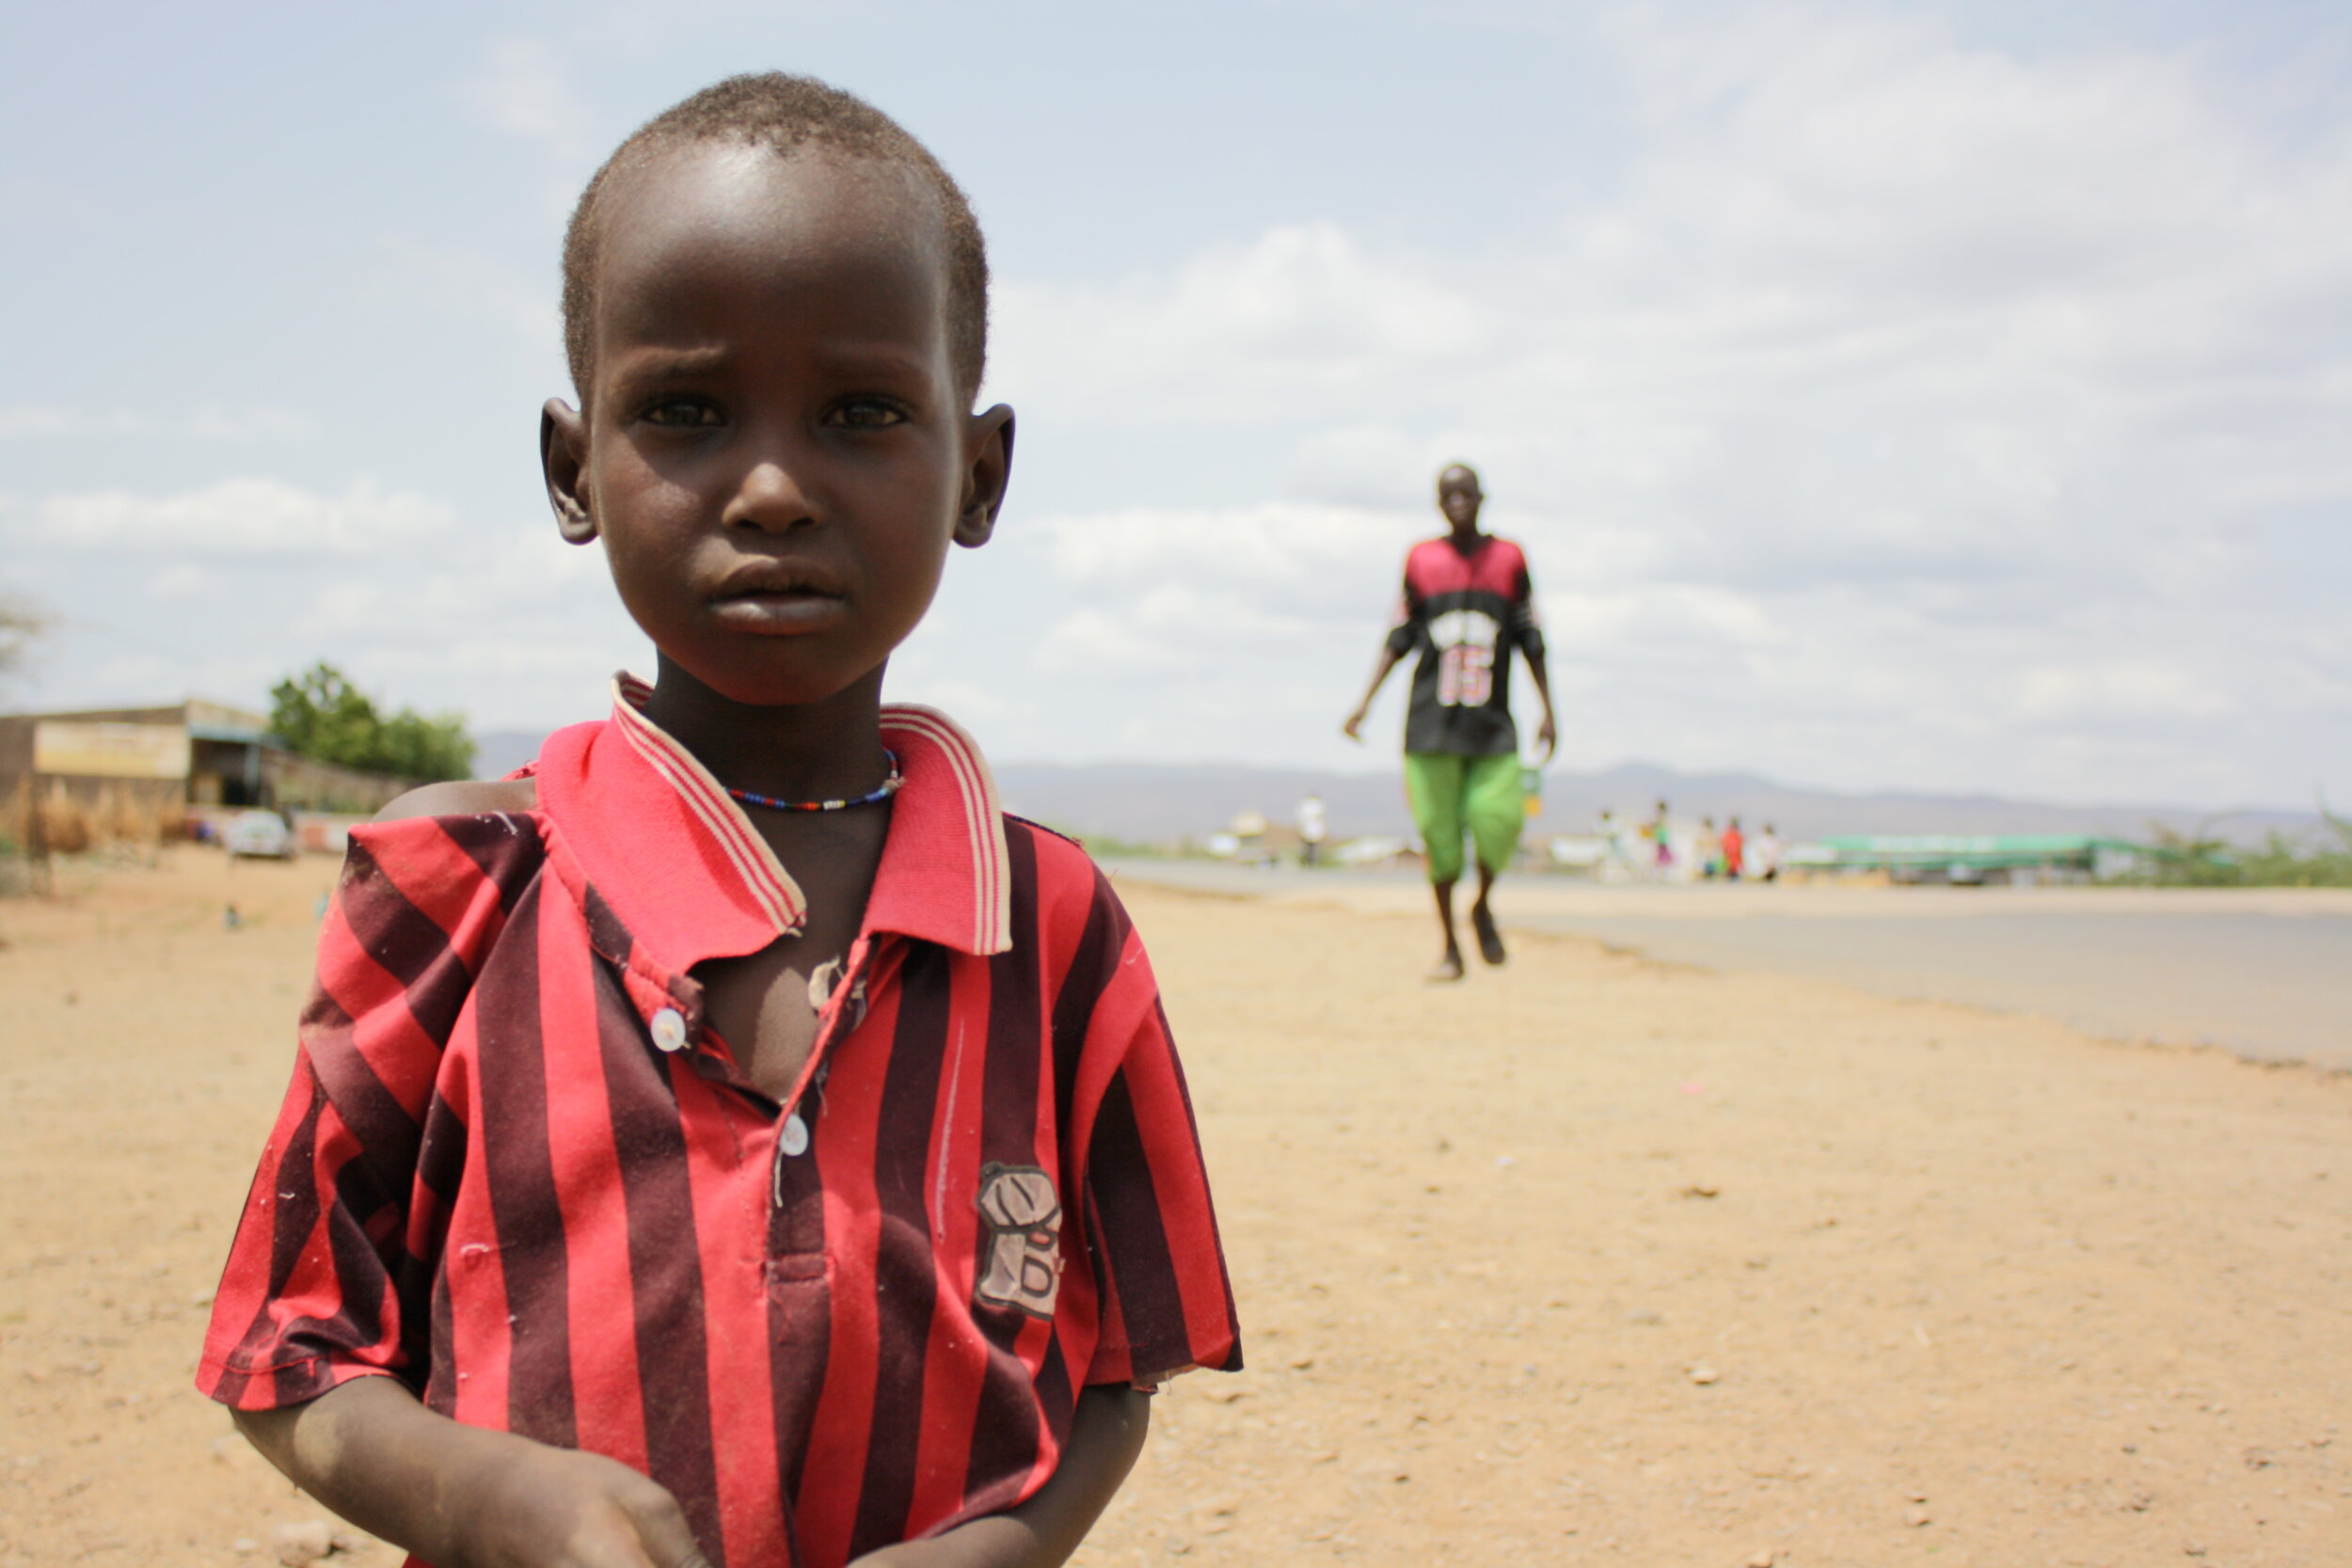  In Kakuma Town, a young boy takes a break from searching for friends to play with. 